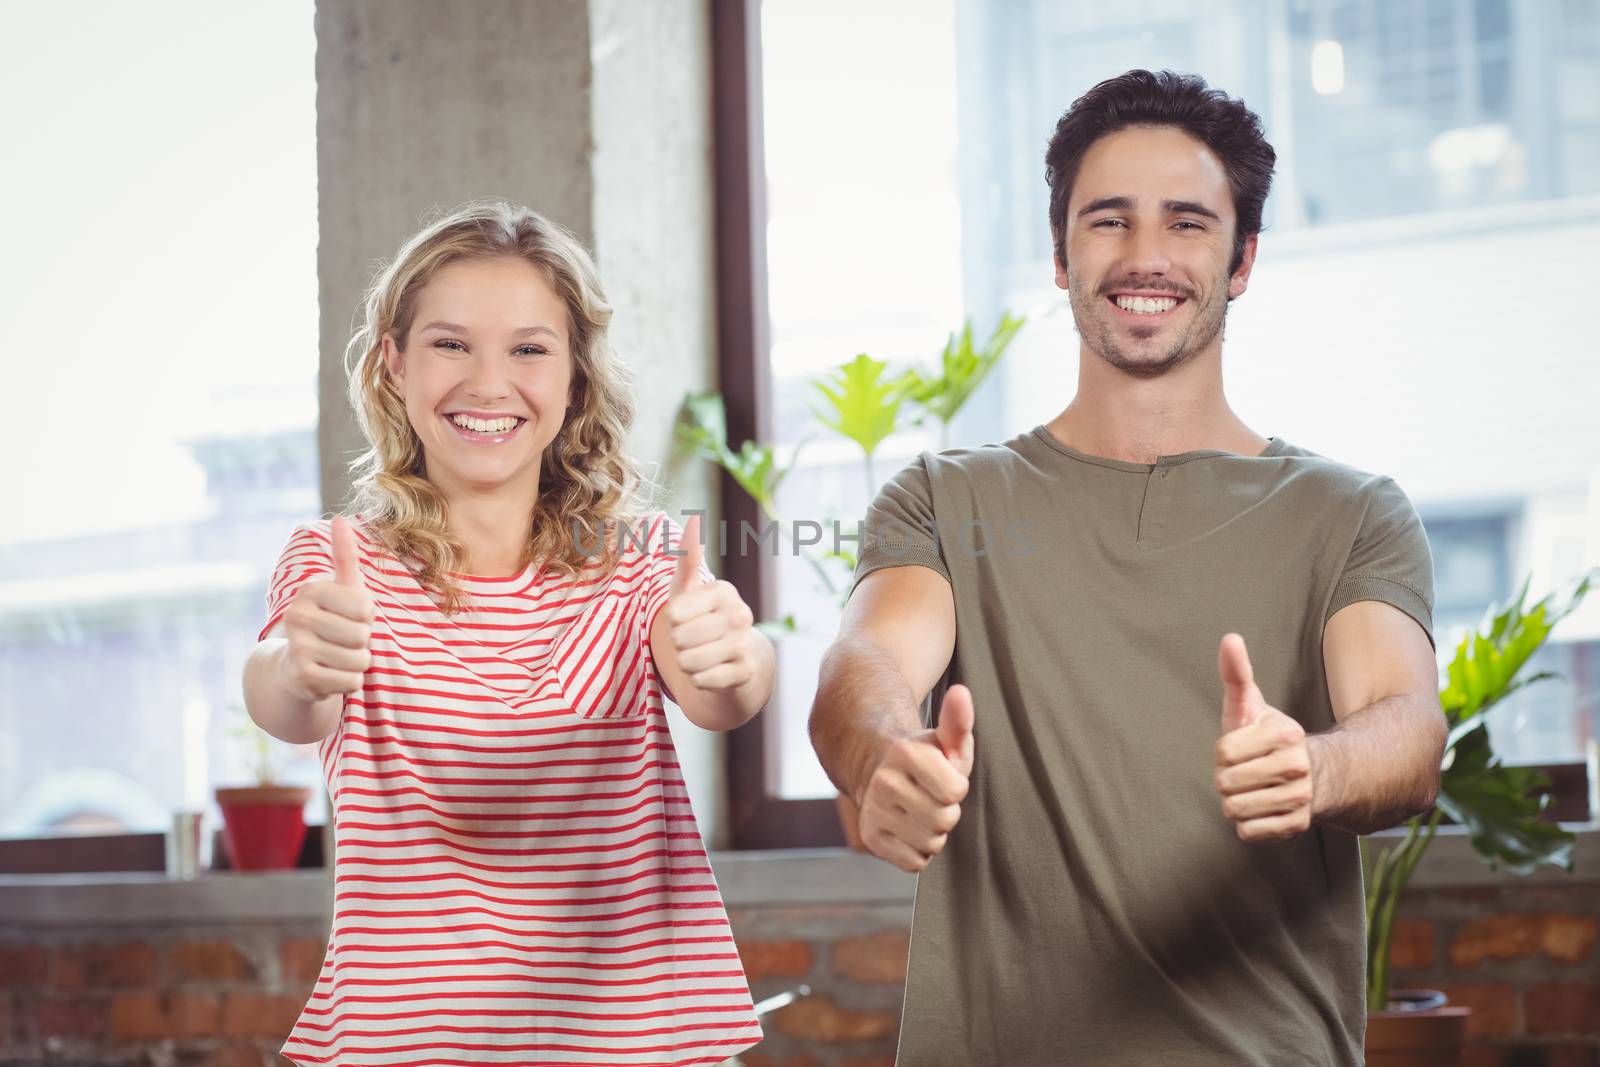 Business people giving thumbs up in creative office